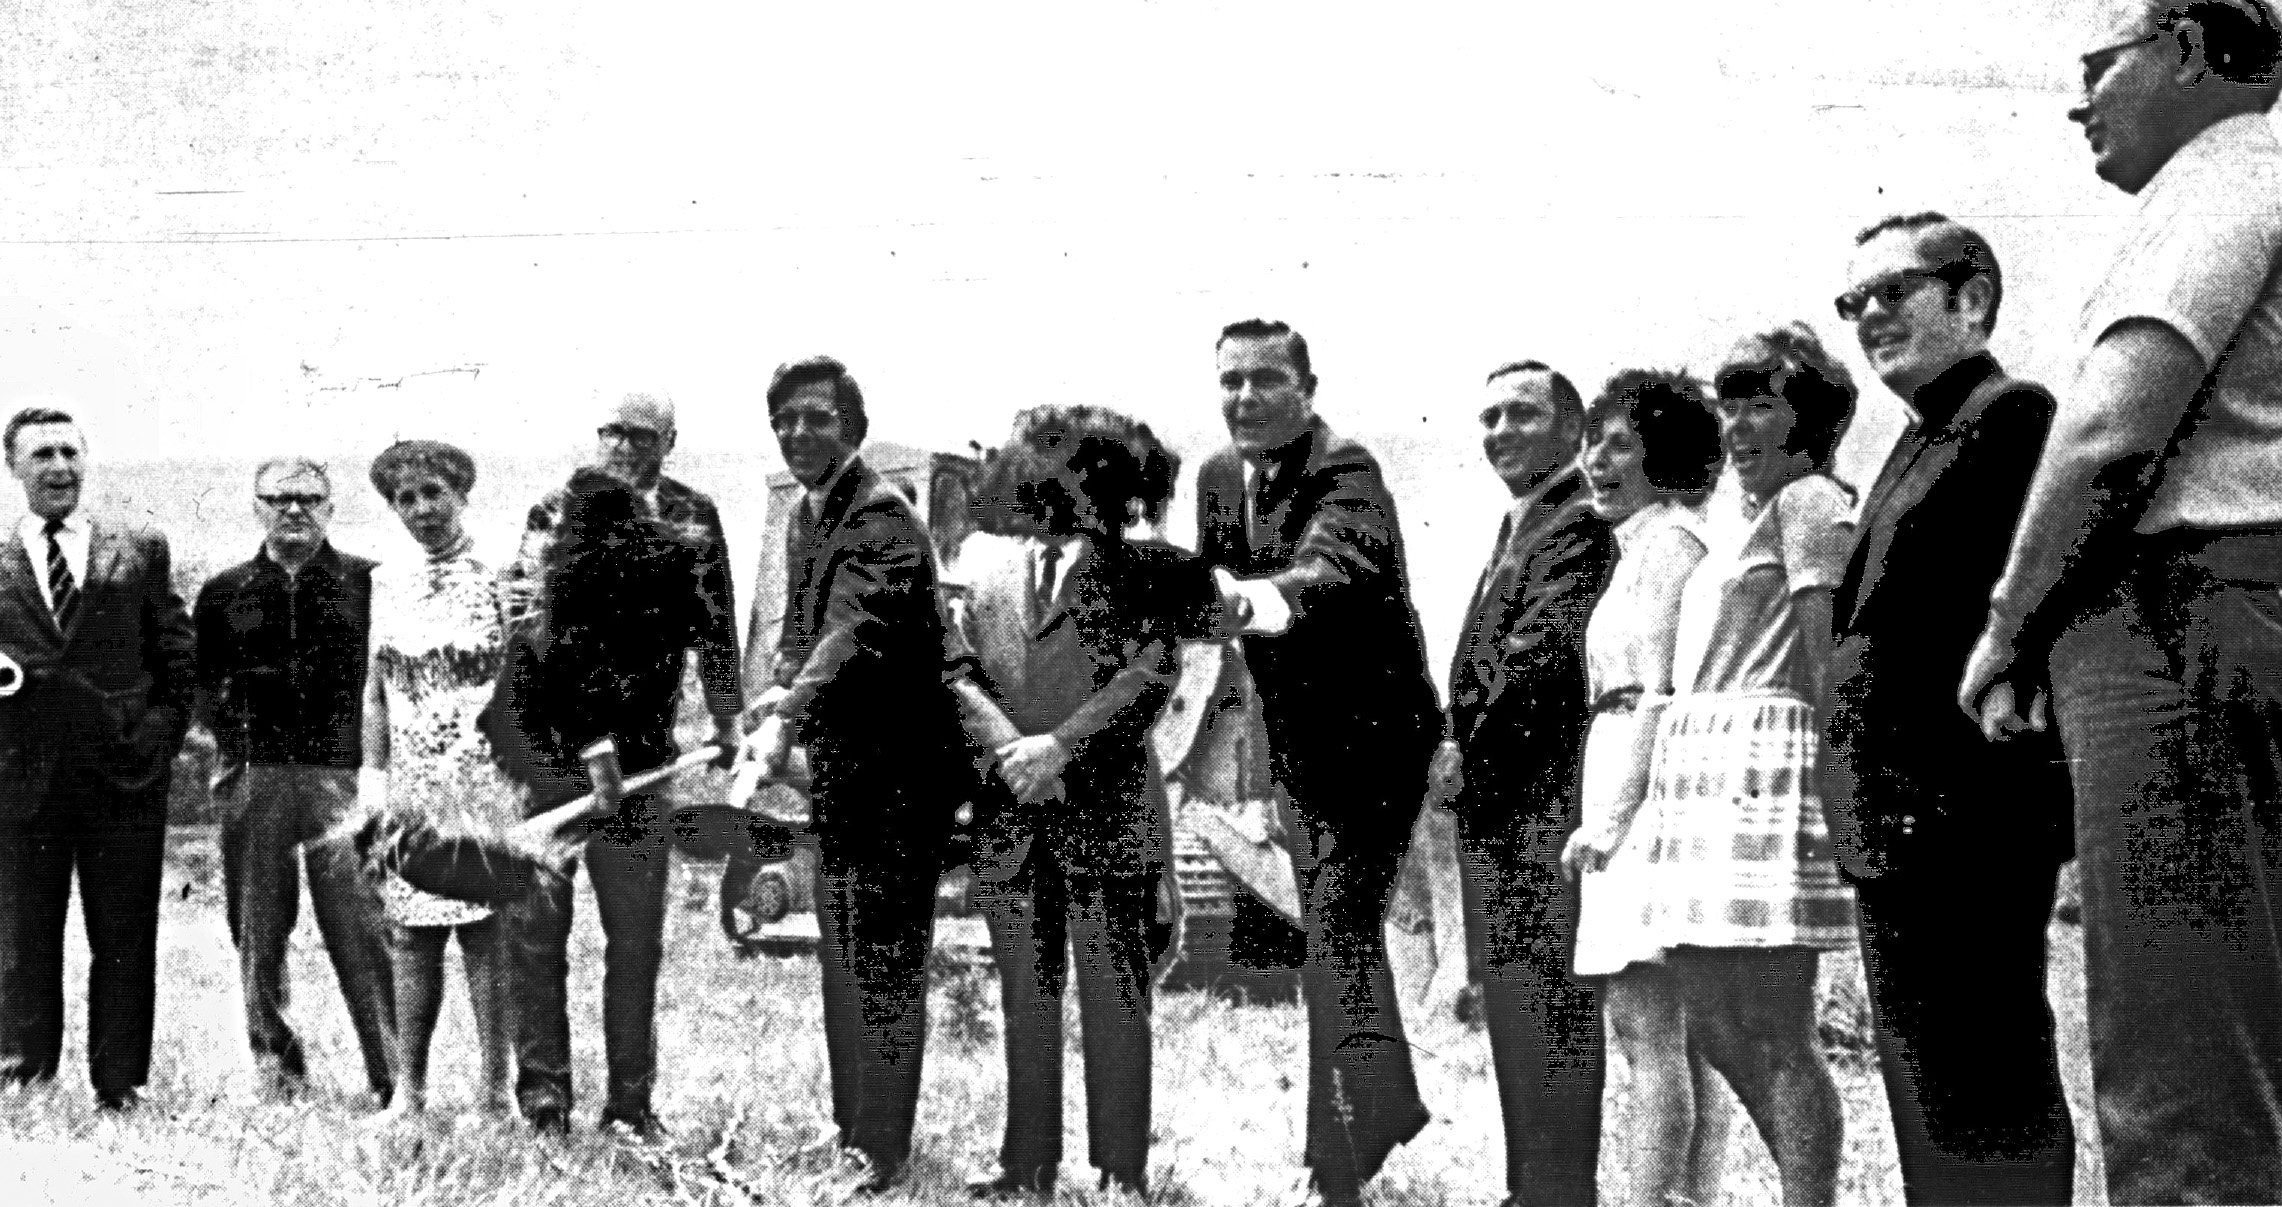   GAINING GROUND.  The nonprofit Hull Medical Center, Inc. held a groundbreaking ceremony in June 1971 on George Washington Boulevard, but it would be several years – and multiple changes in design – before the medical facility would open. Shown at t